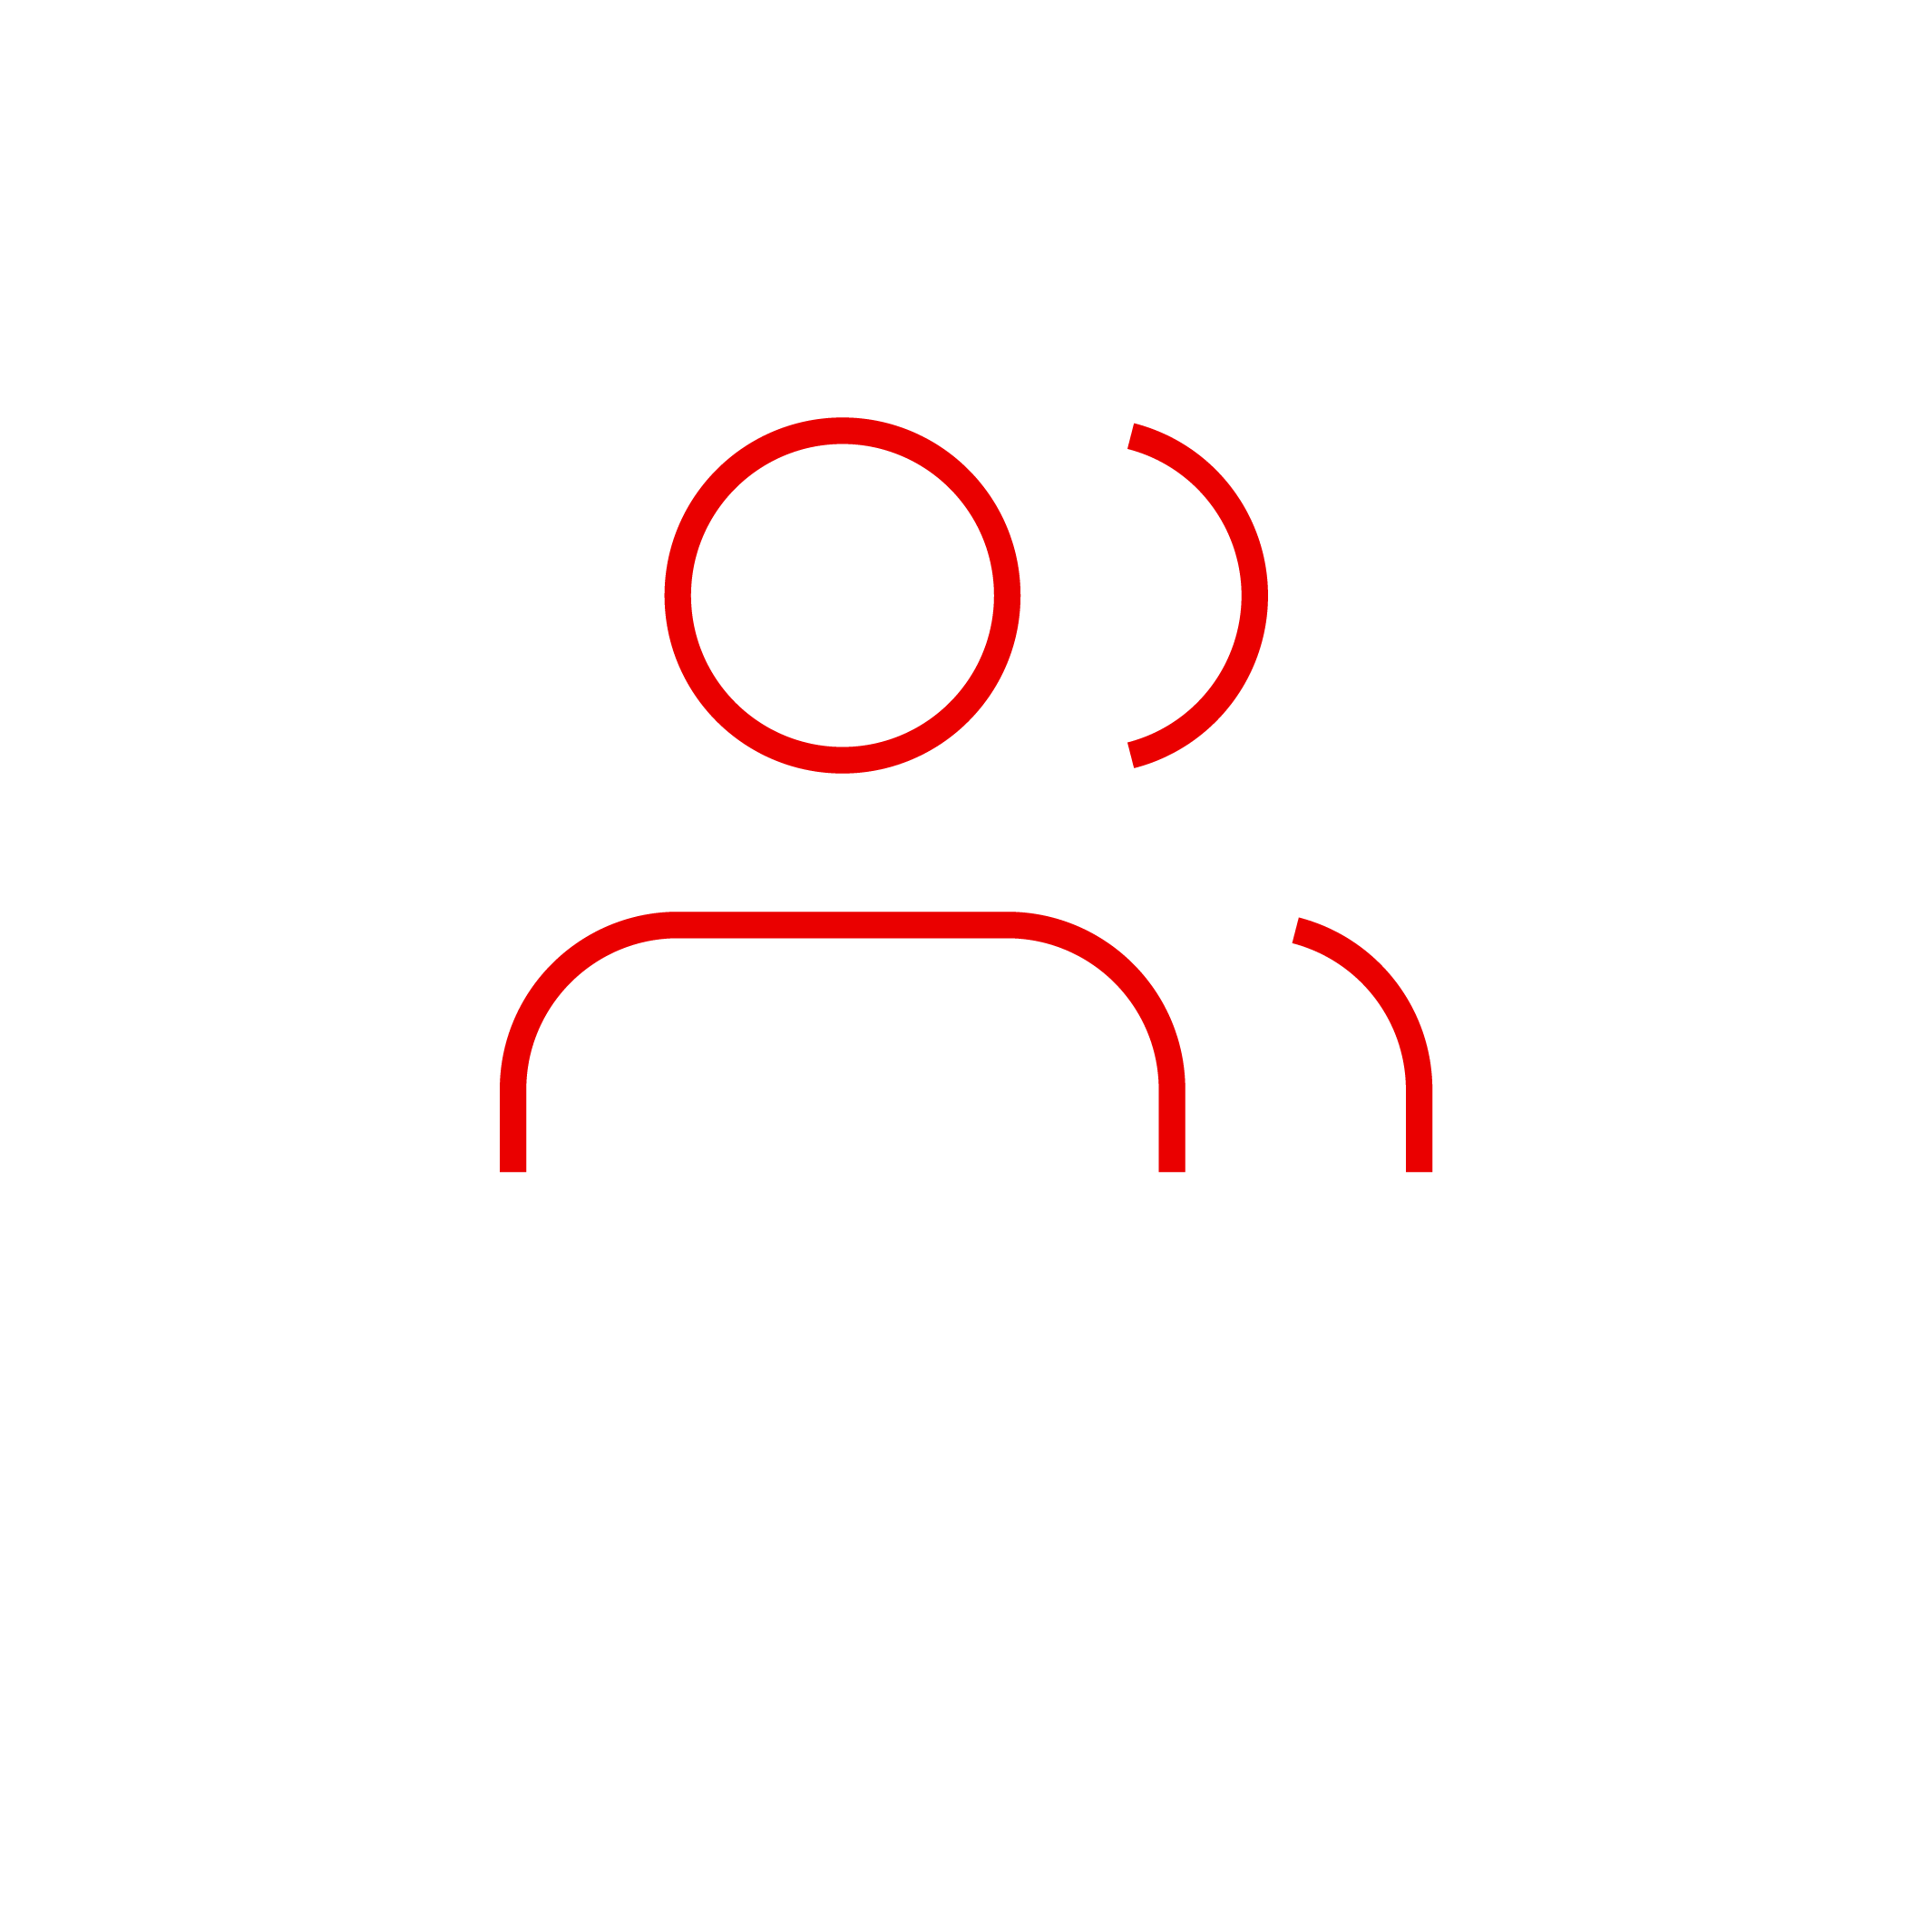 Discover new customers